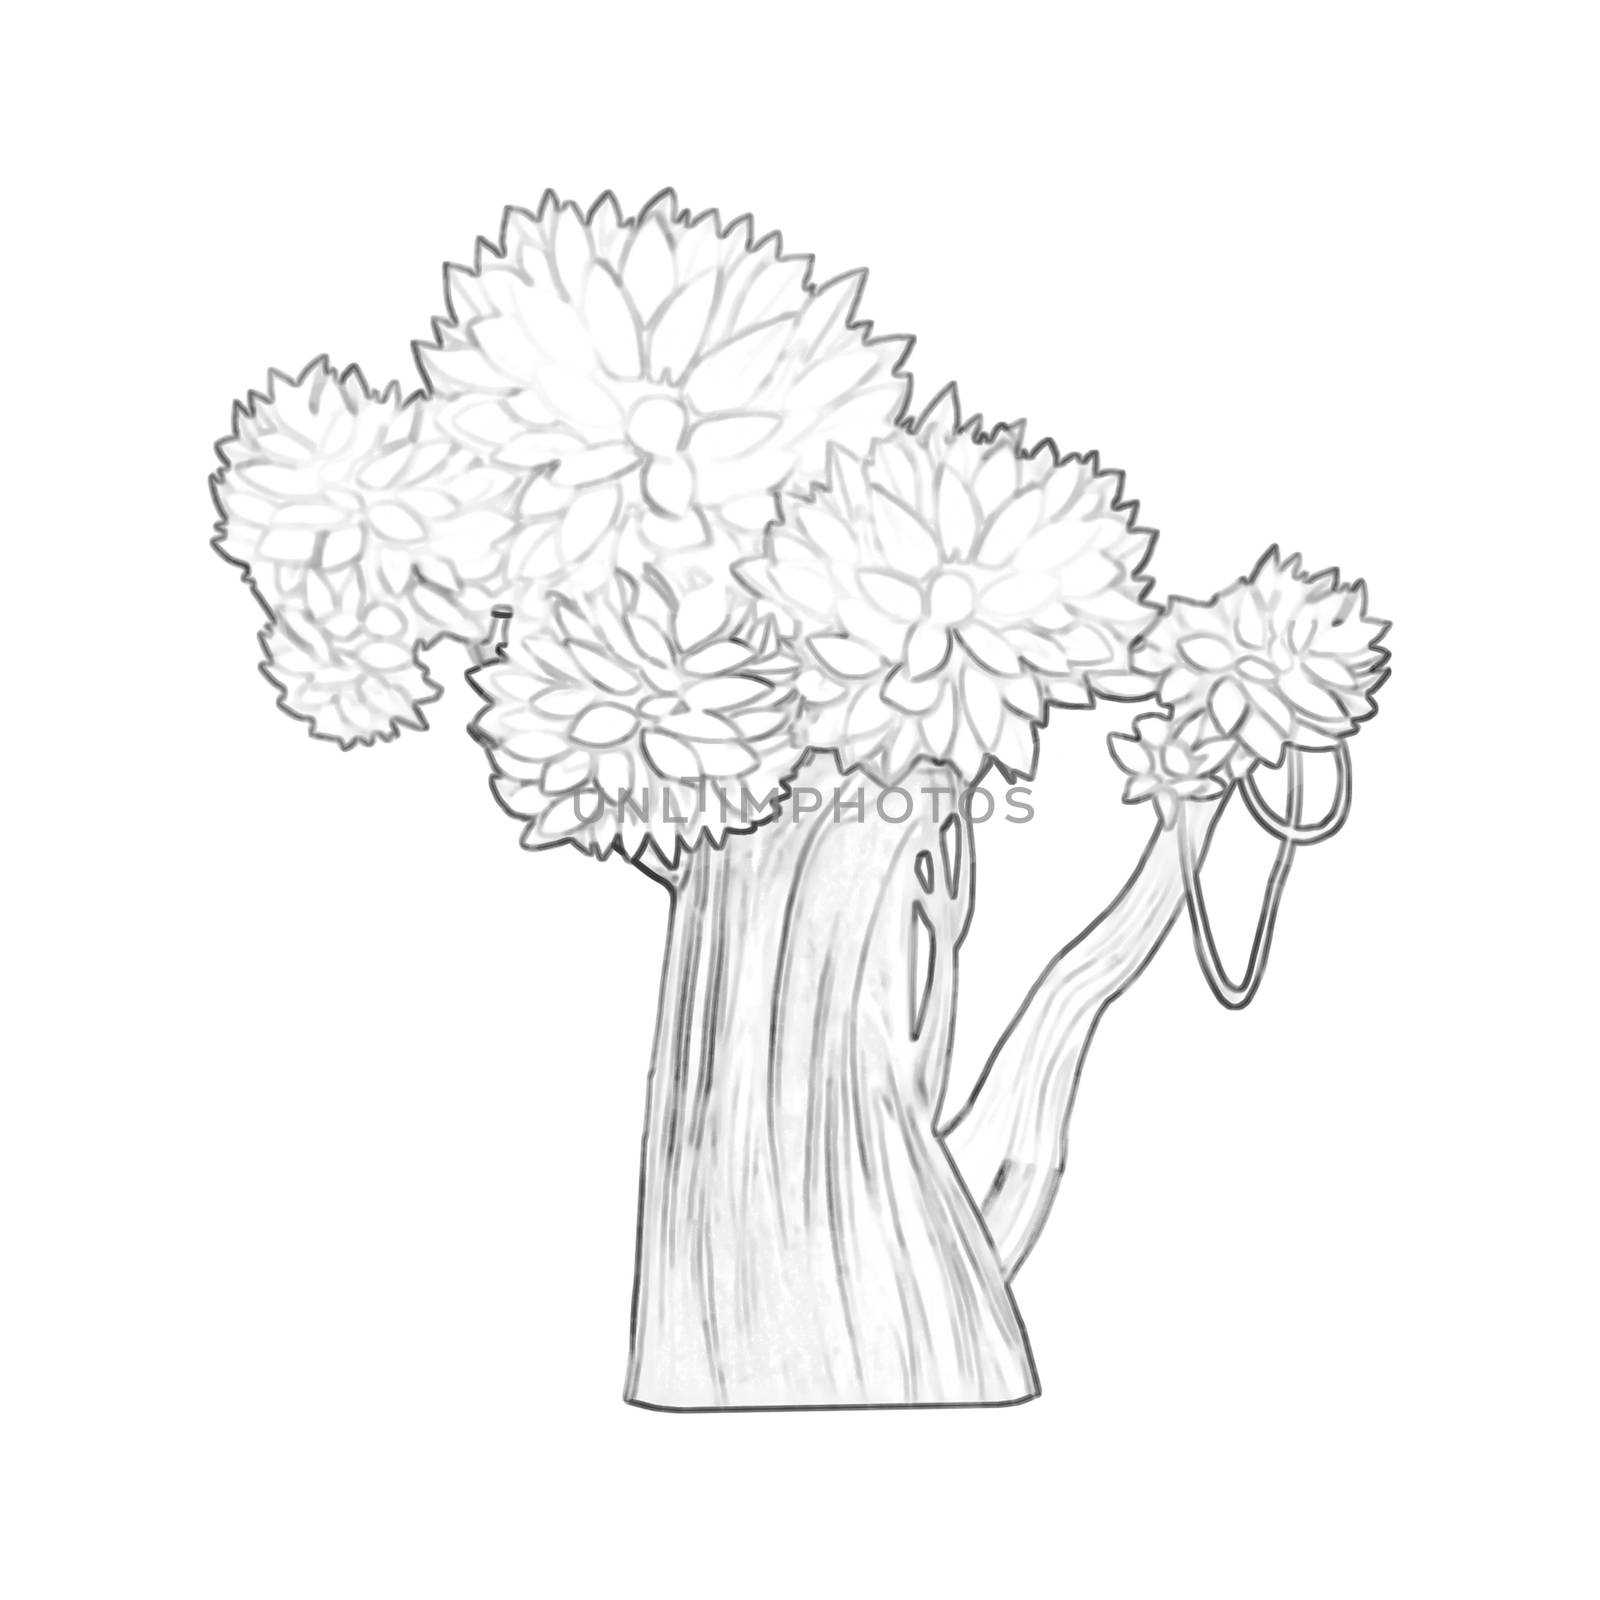 Illustration: Coloring Book Series: Tree. Soft thin line. Print it and bring it to Life with Color! Fantastic Outline / Sketch / Line Art Design. by NextMars